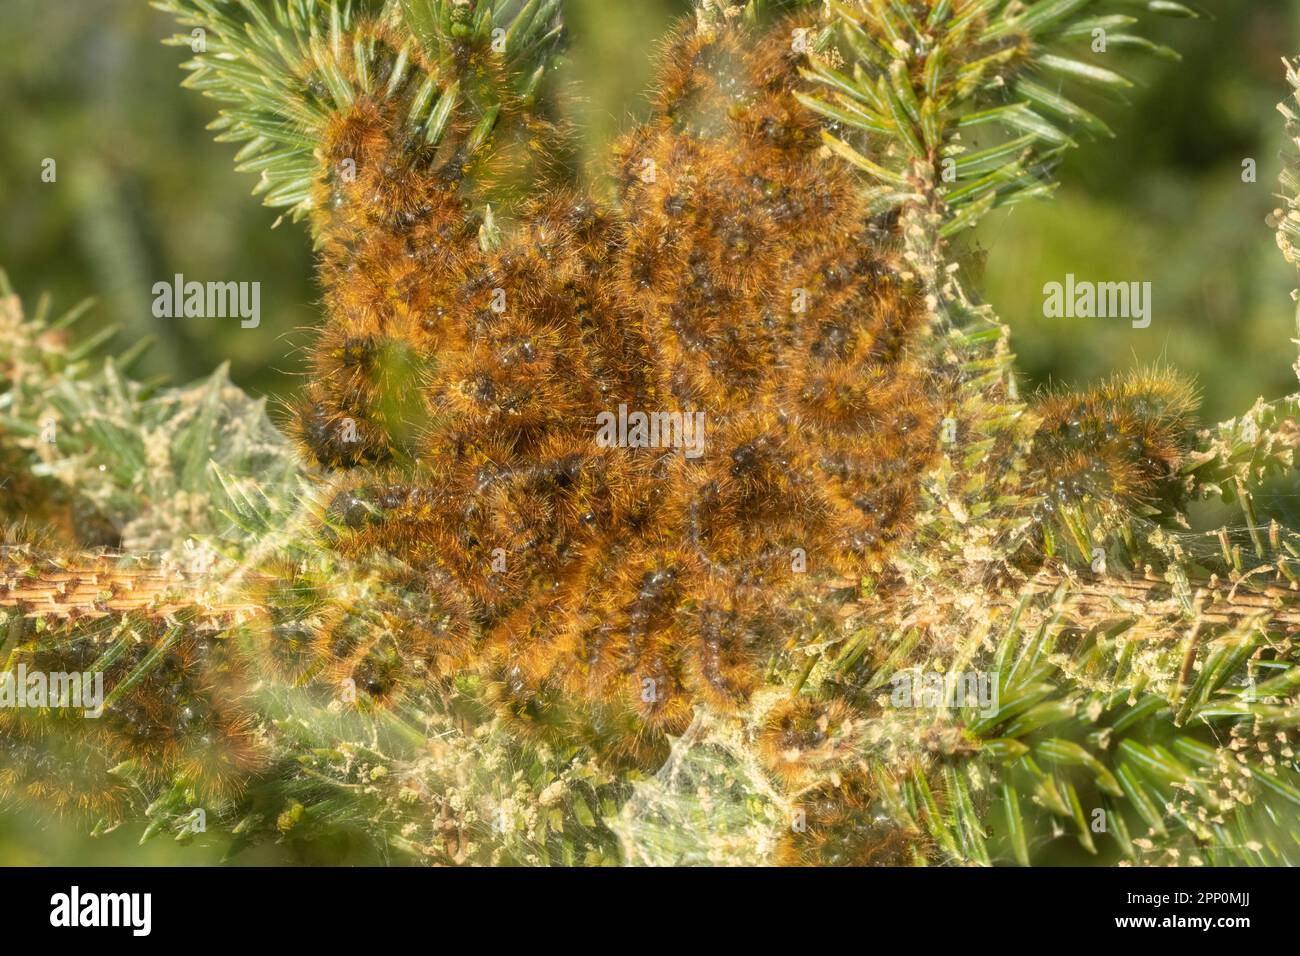 Caterpillars of Silver Spotted Tiger Moth (Lophocampa argentata) on Sitka Spruce tree Stock Photo